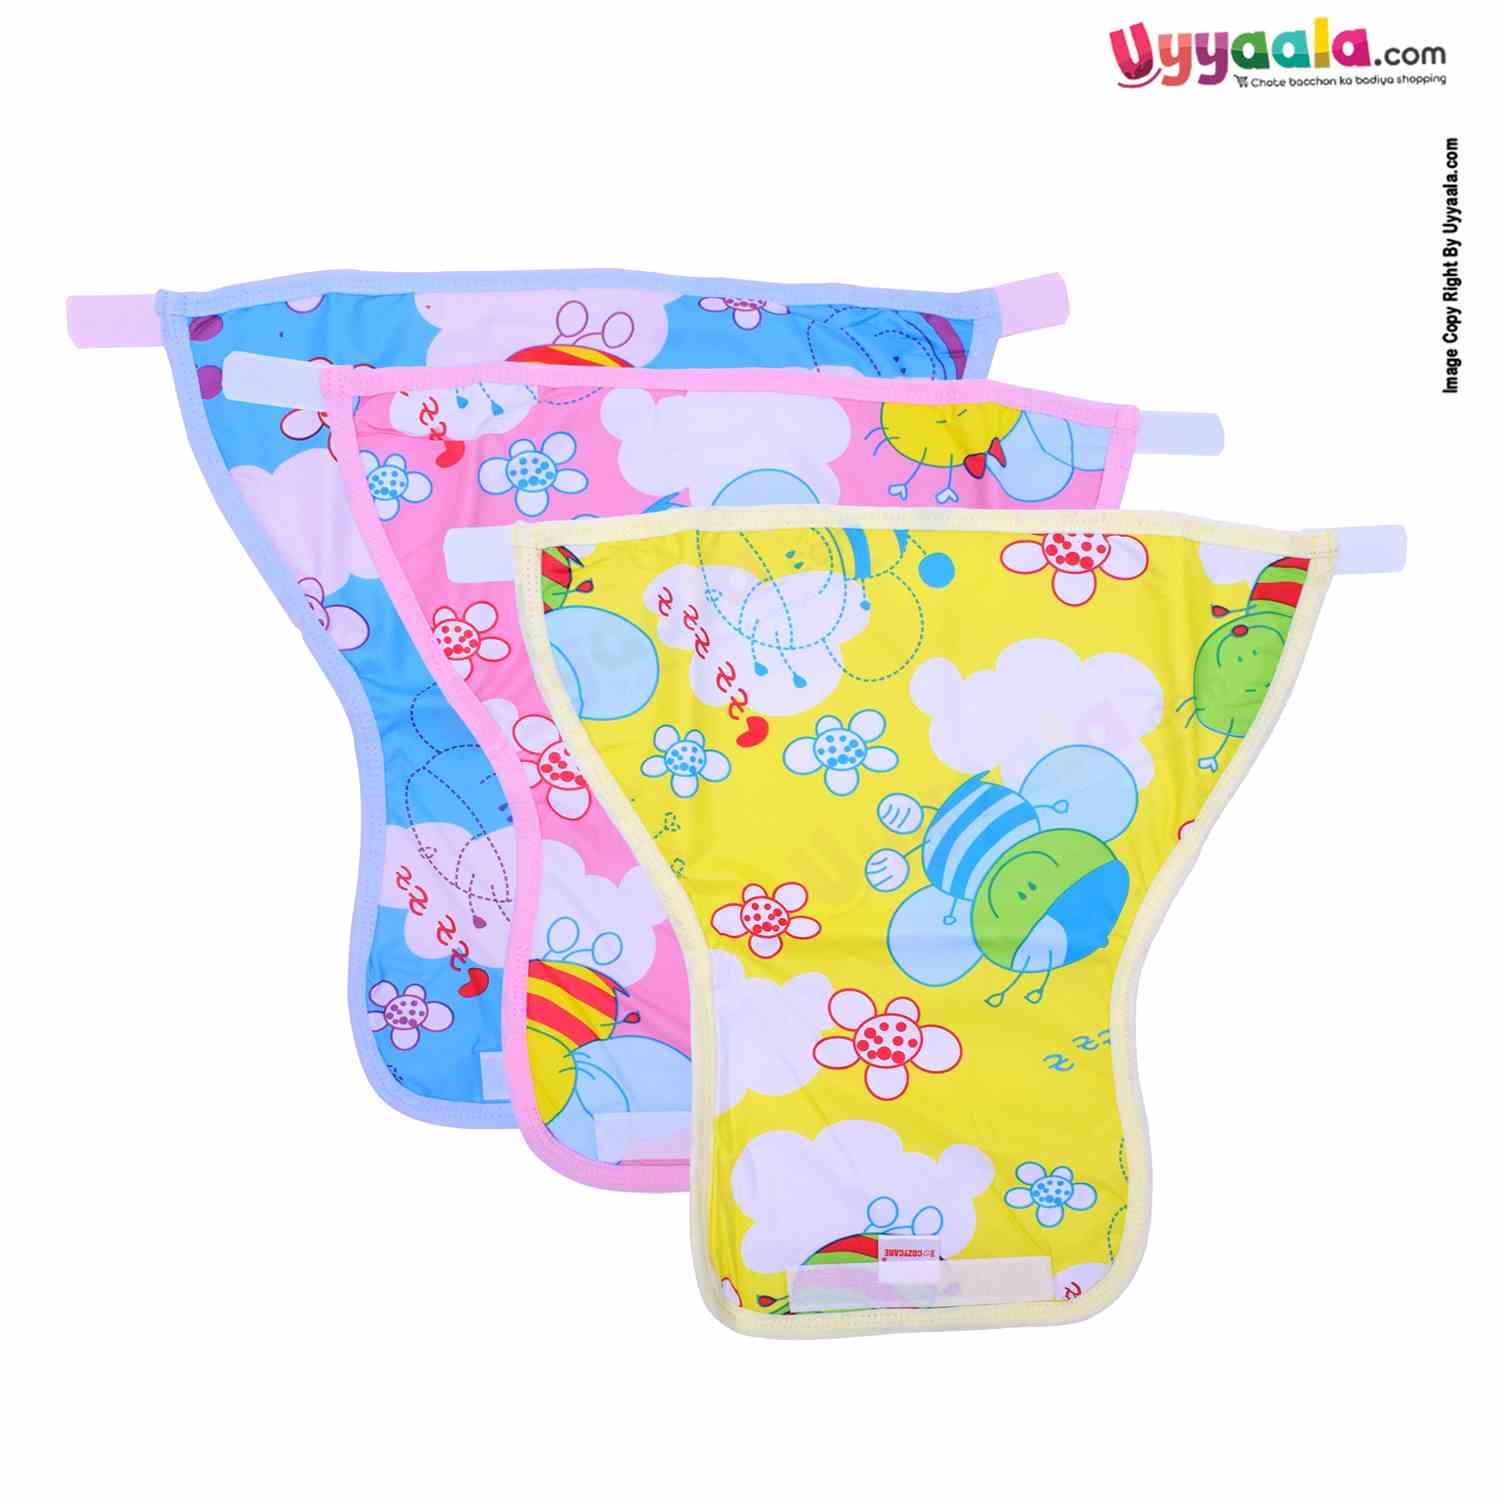 COZYCARE Washable Diapers Plastic Velcro, Honey Bee Print Pink, Blue & Yellow With Out Pads- 3P Set (L)